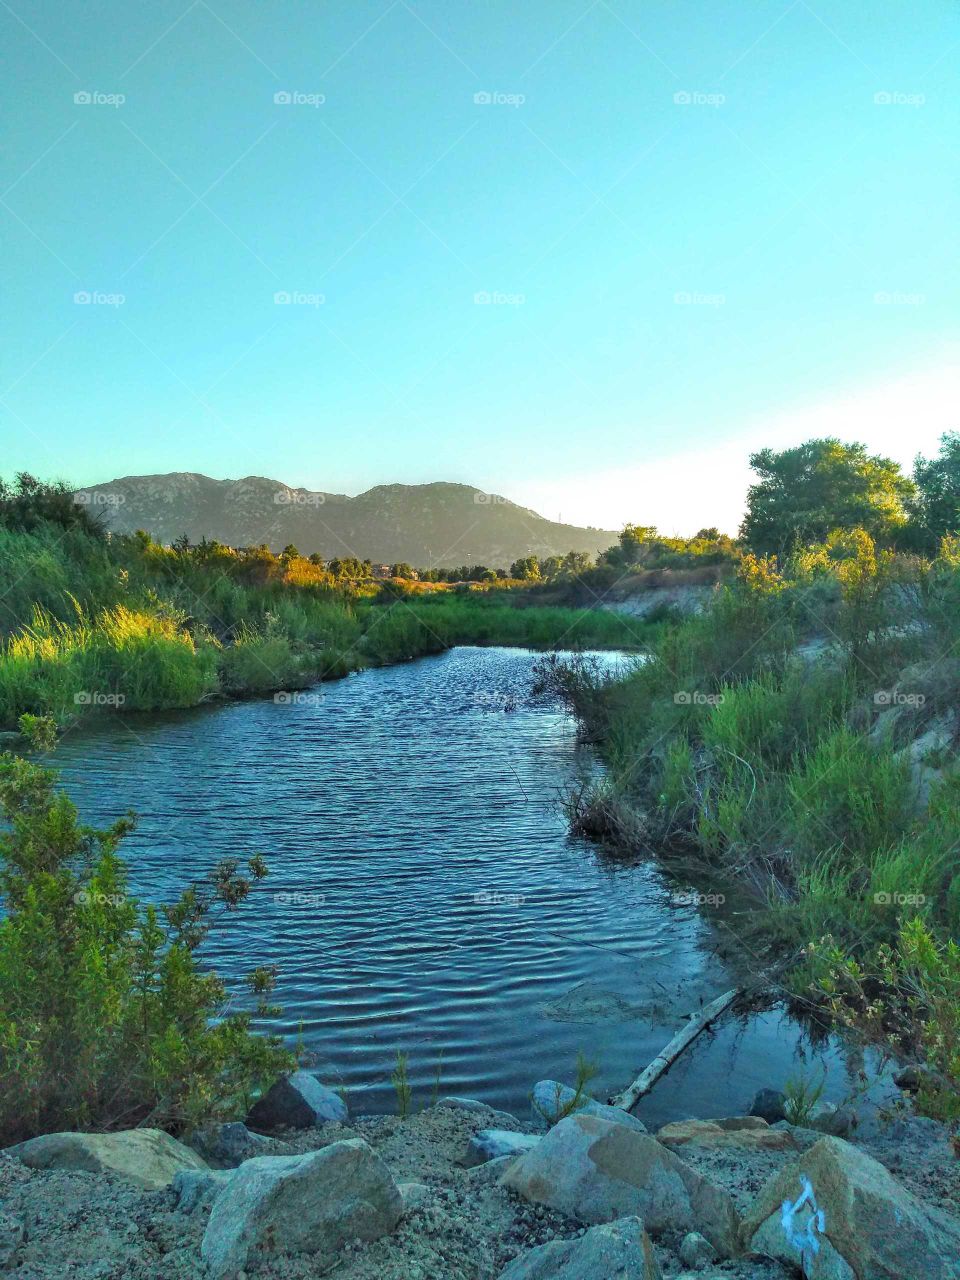 Down by the river/Temecula California